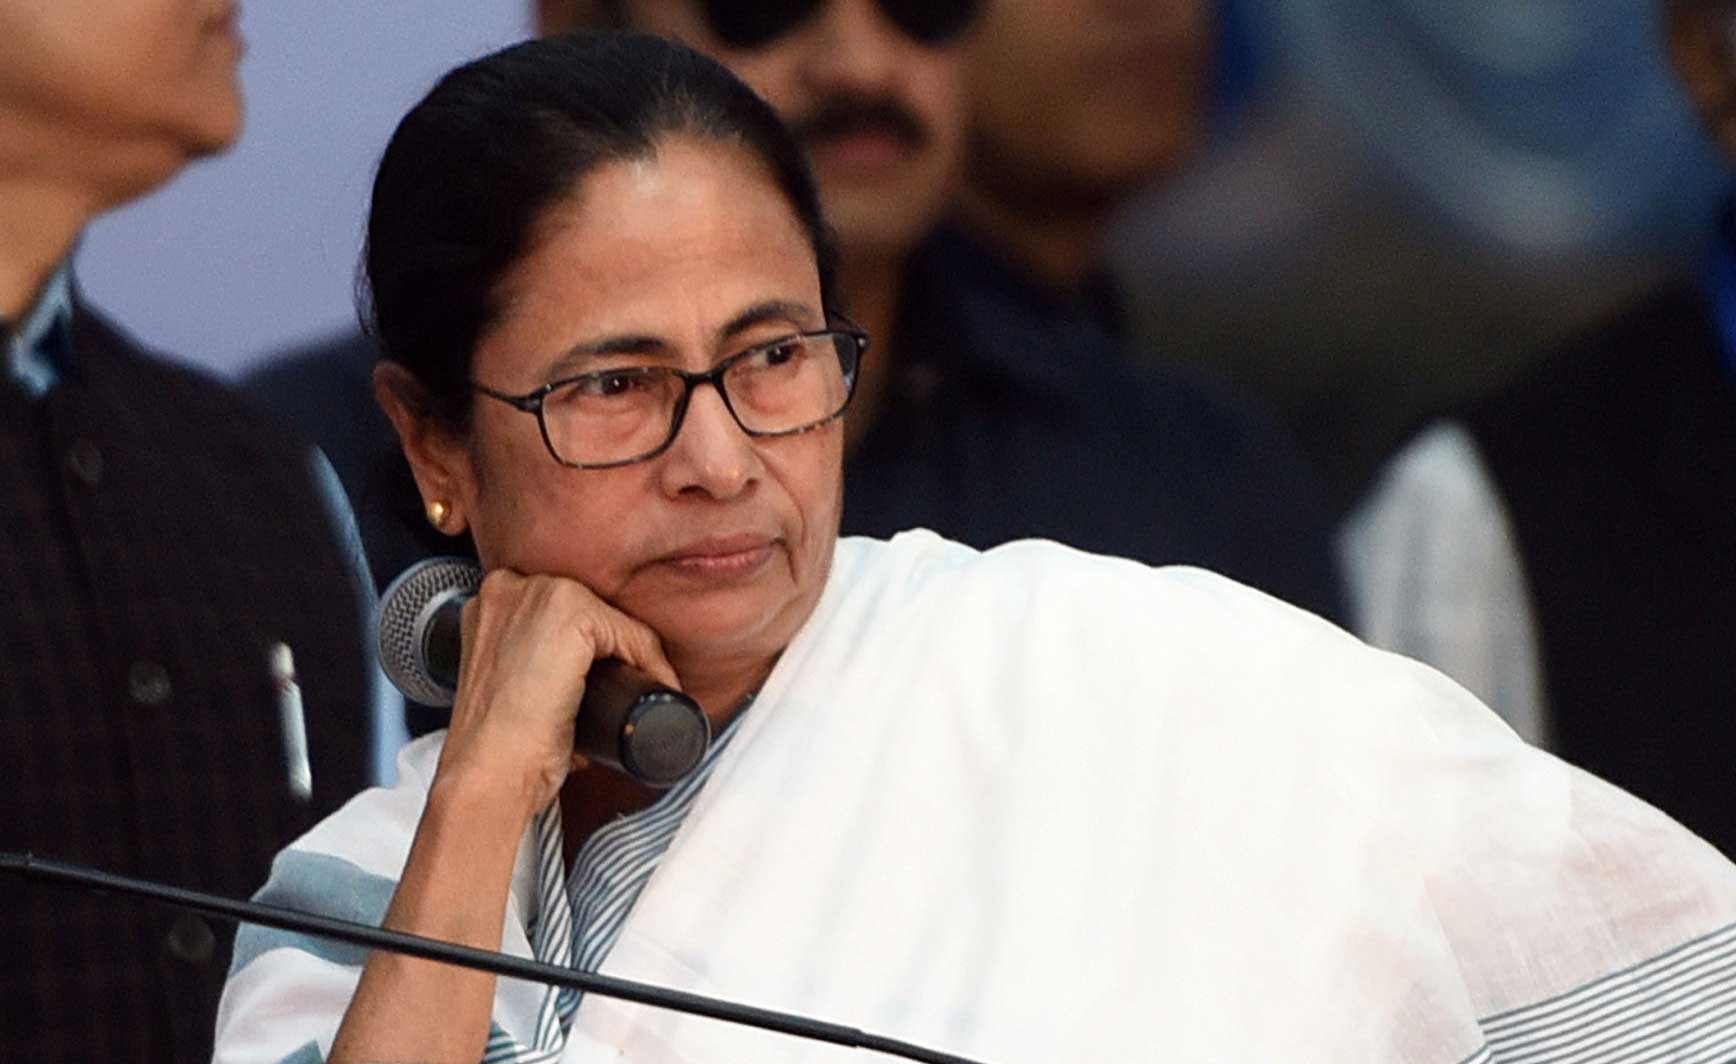 Chief minister Mamata Banerjee believes officers are “brainwashed” by the BJP government during their stint in Delhi.

